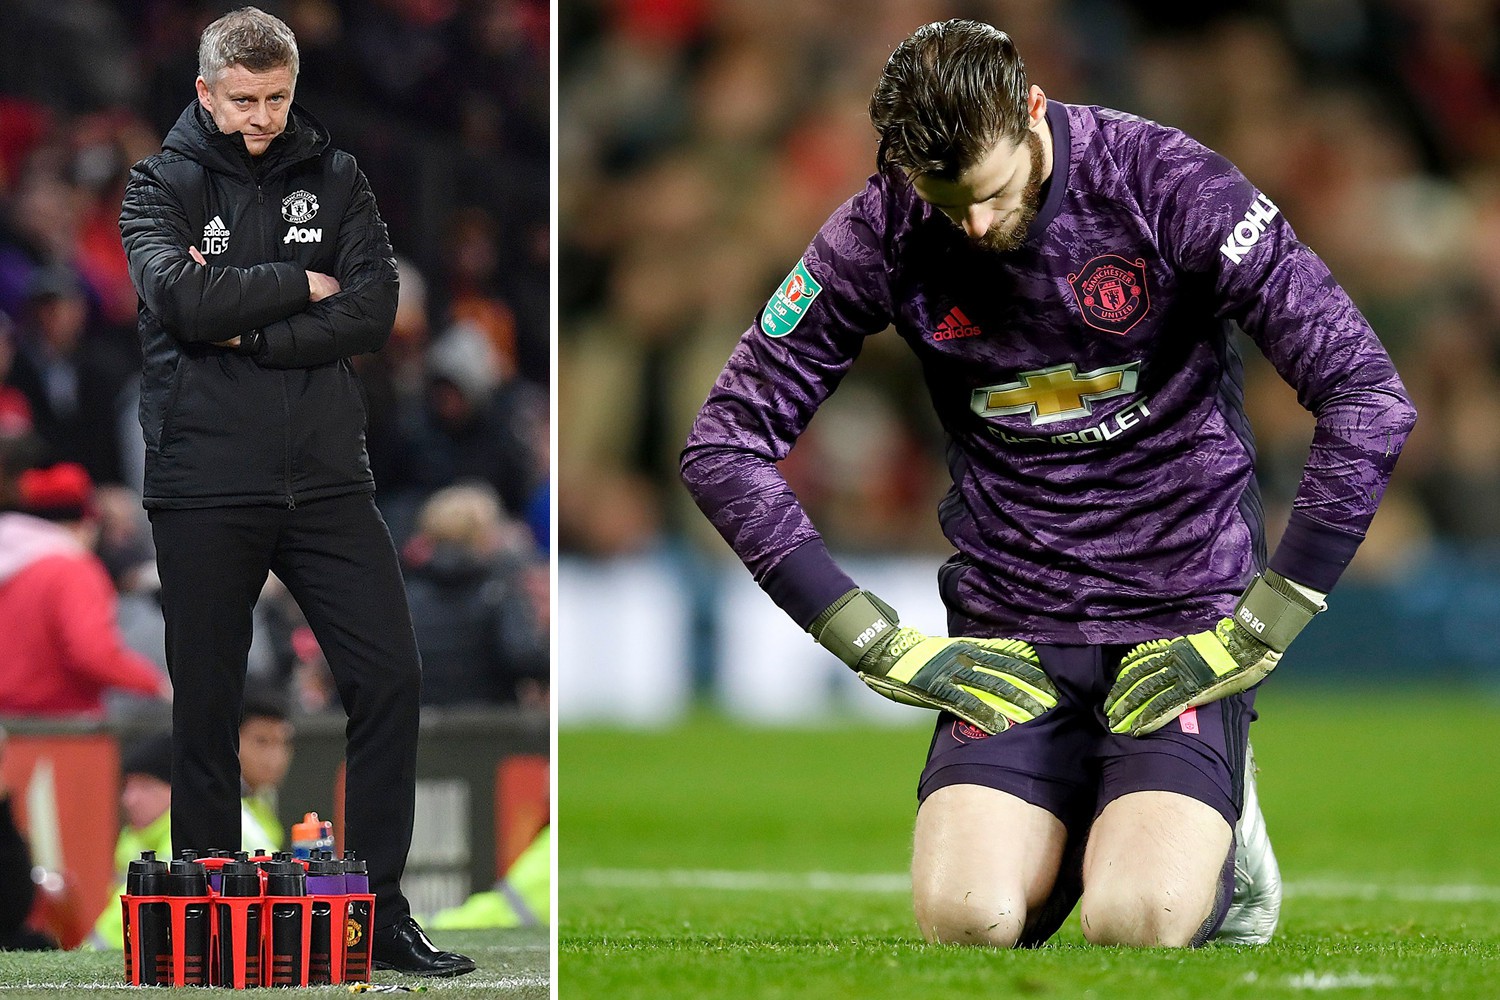 , Man Utd on their way back to former glory under Solskjaer, but stats show De Gea and misfiring forwards letting him down